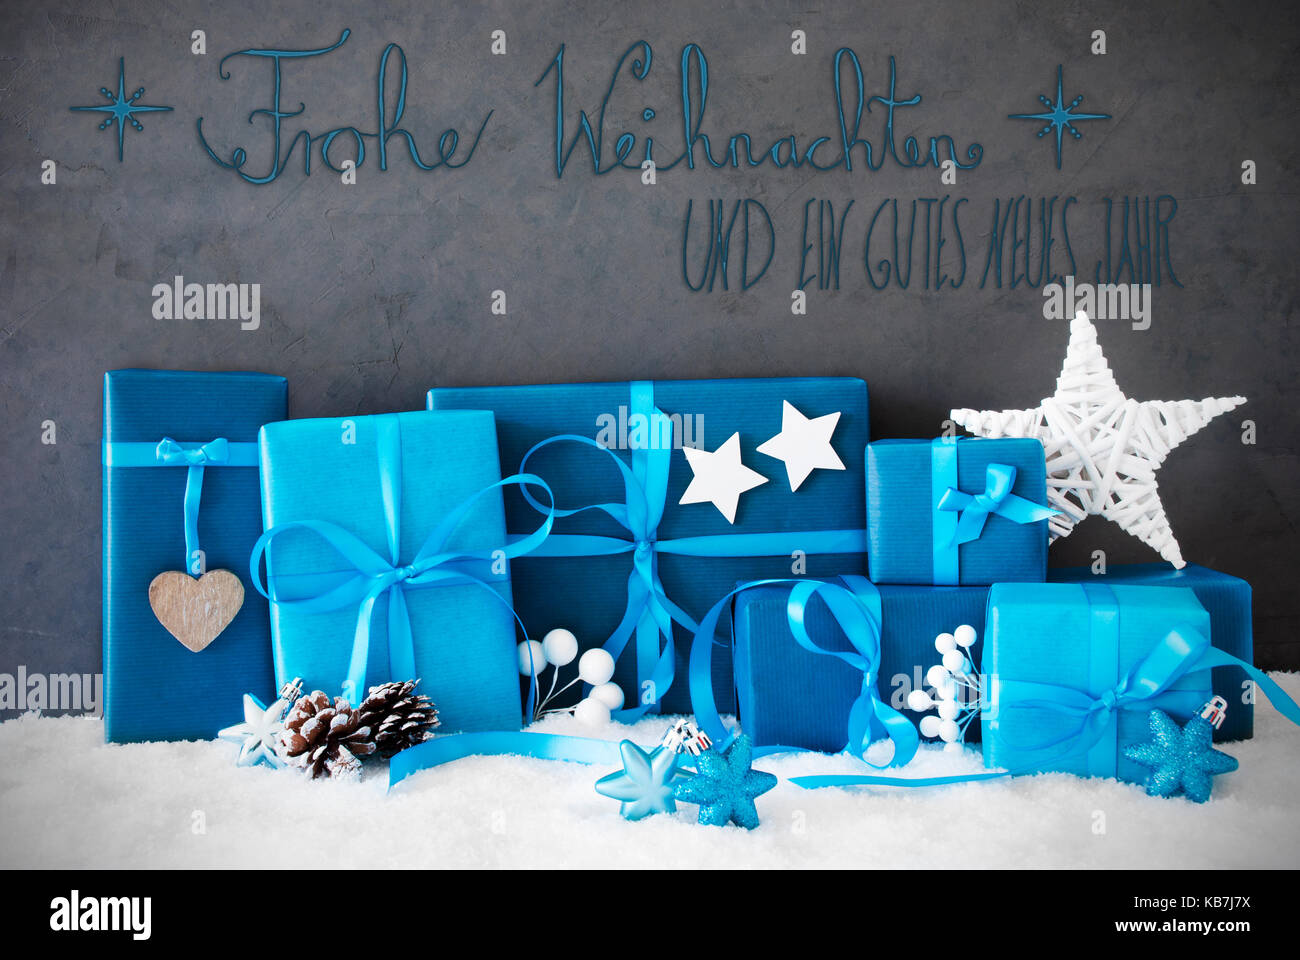 Christmas Gifts, Snow, Calligraphy Gutes Neues Jahr Means Happy New Year Stock Photo